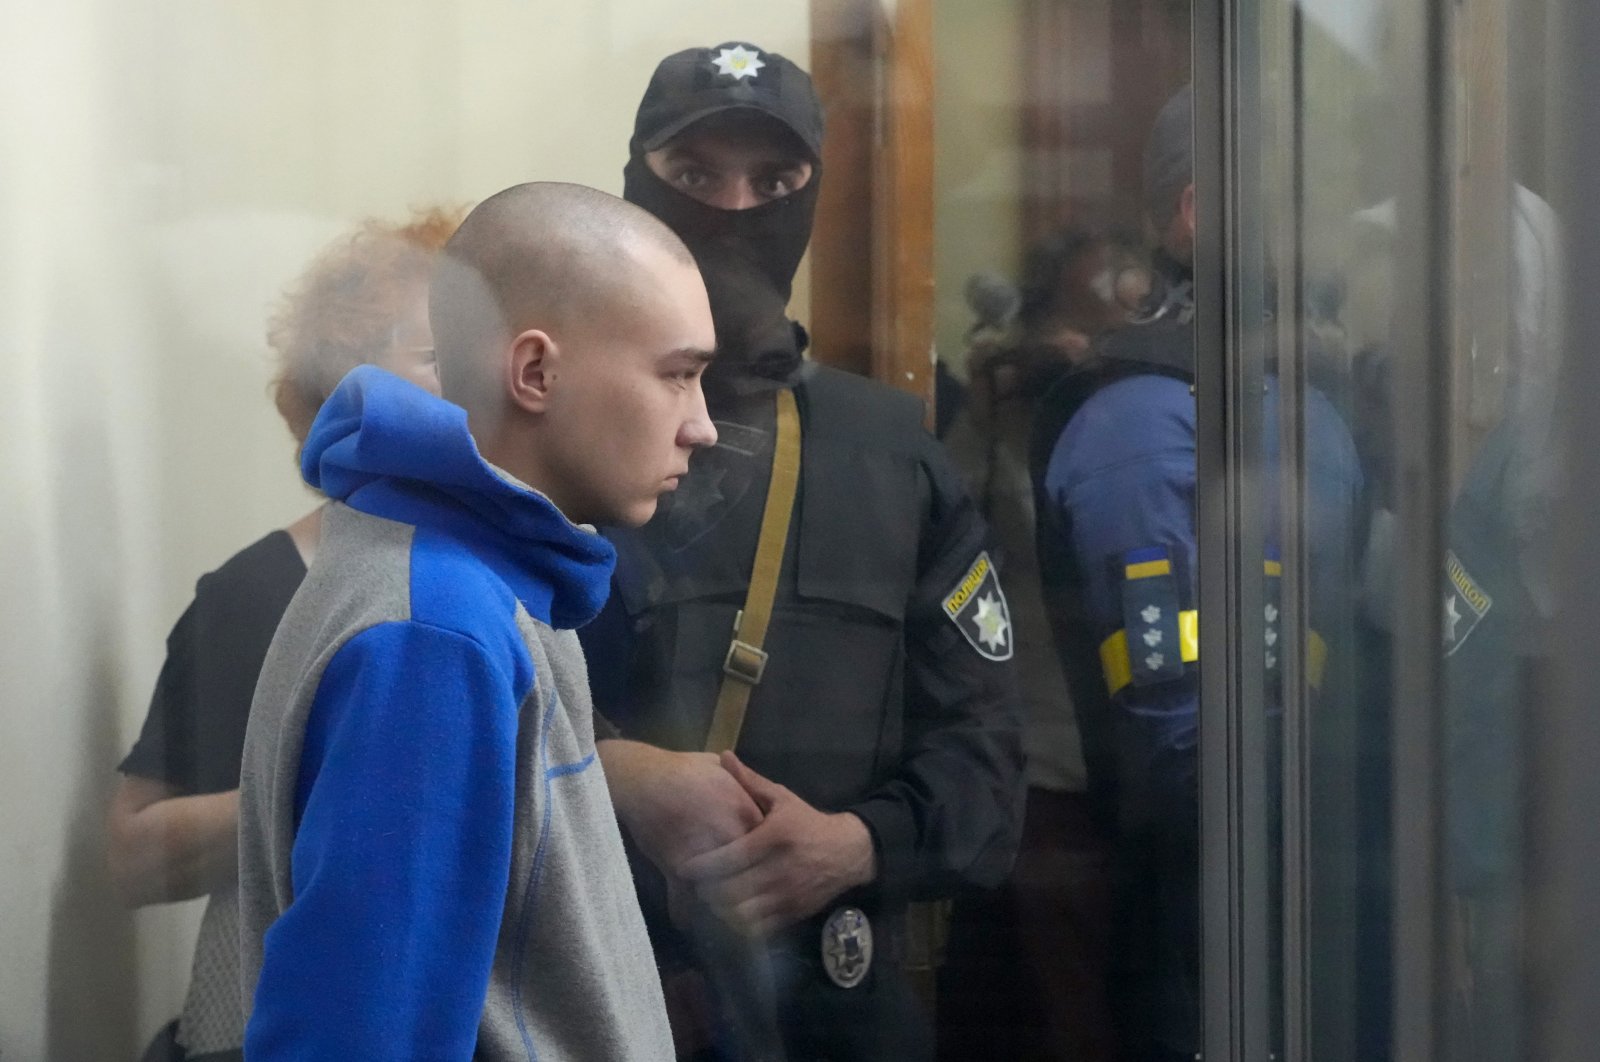 Russian army Sergeant Vadim Shishimarin is seen behind a glass during a court hearing in Kyiv, Ukraine, May 13, 2022. (AP Photo)